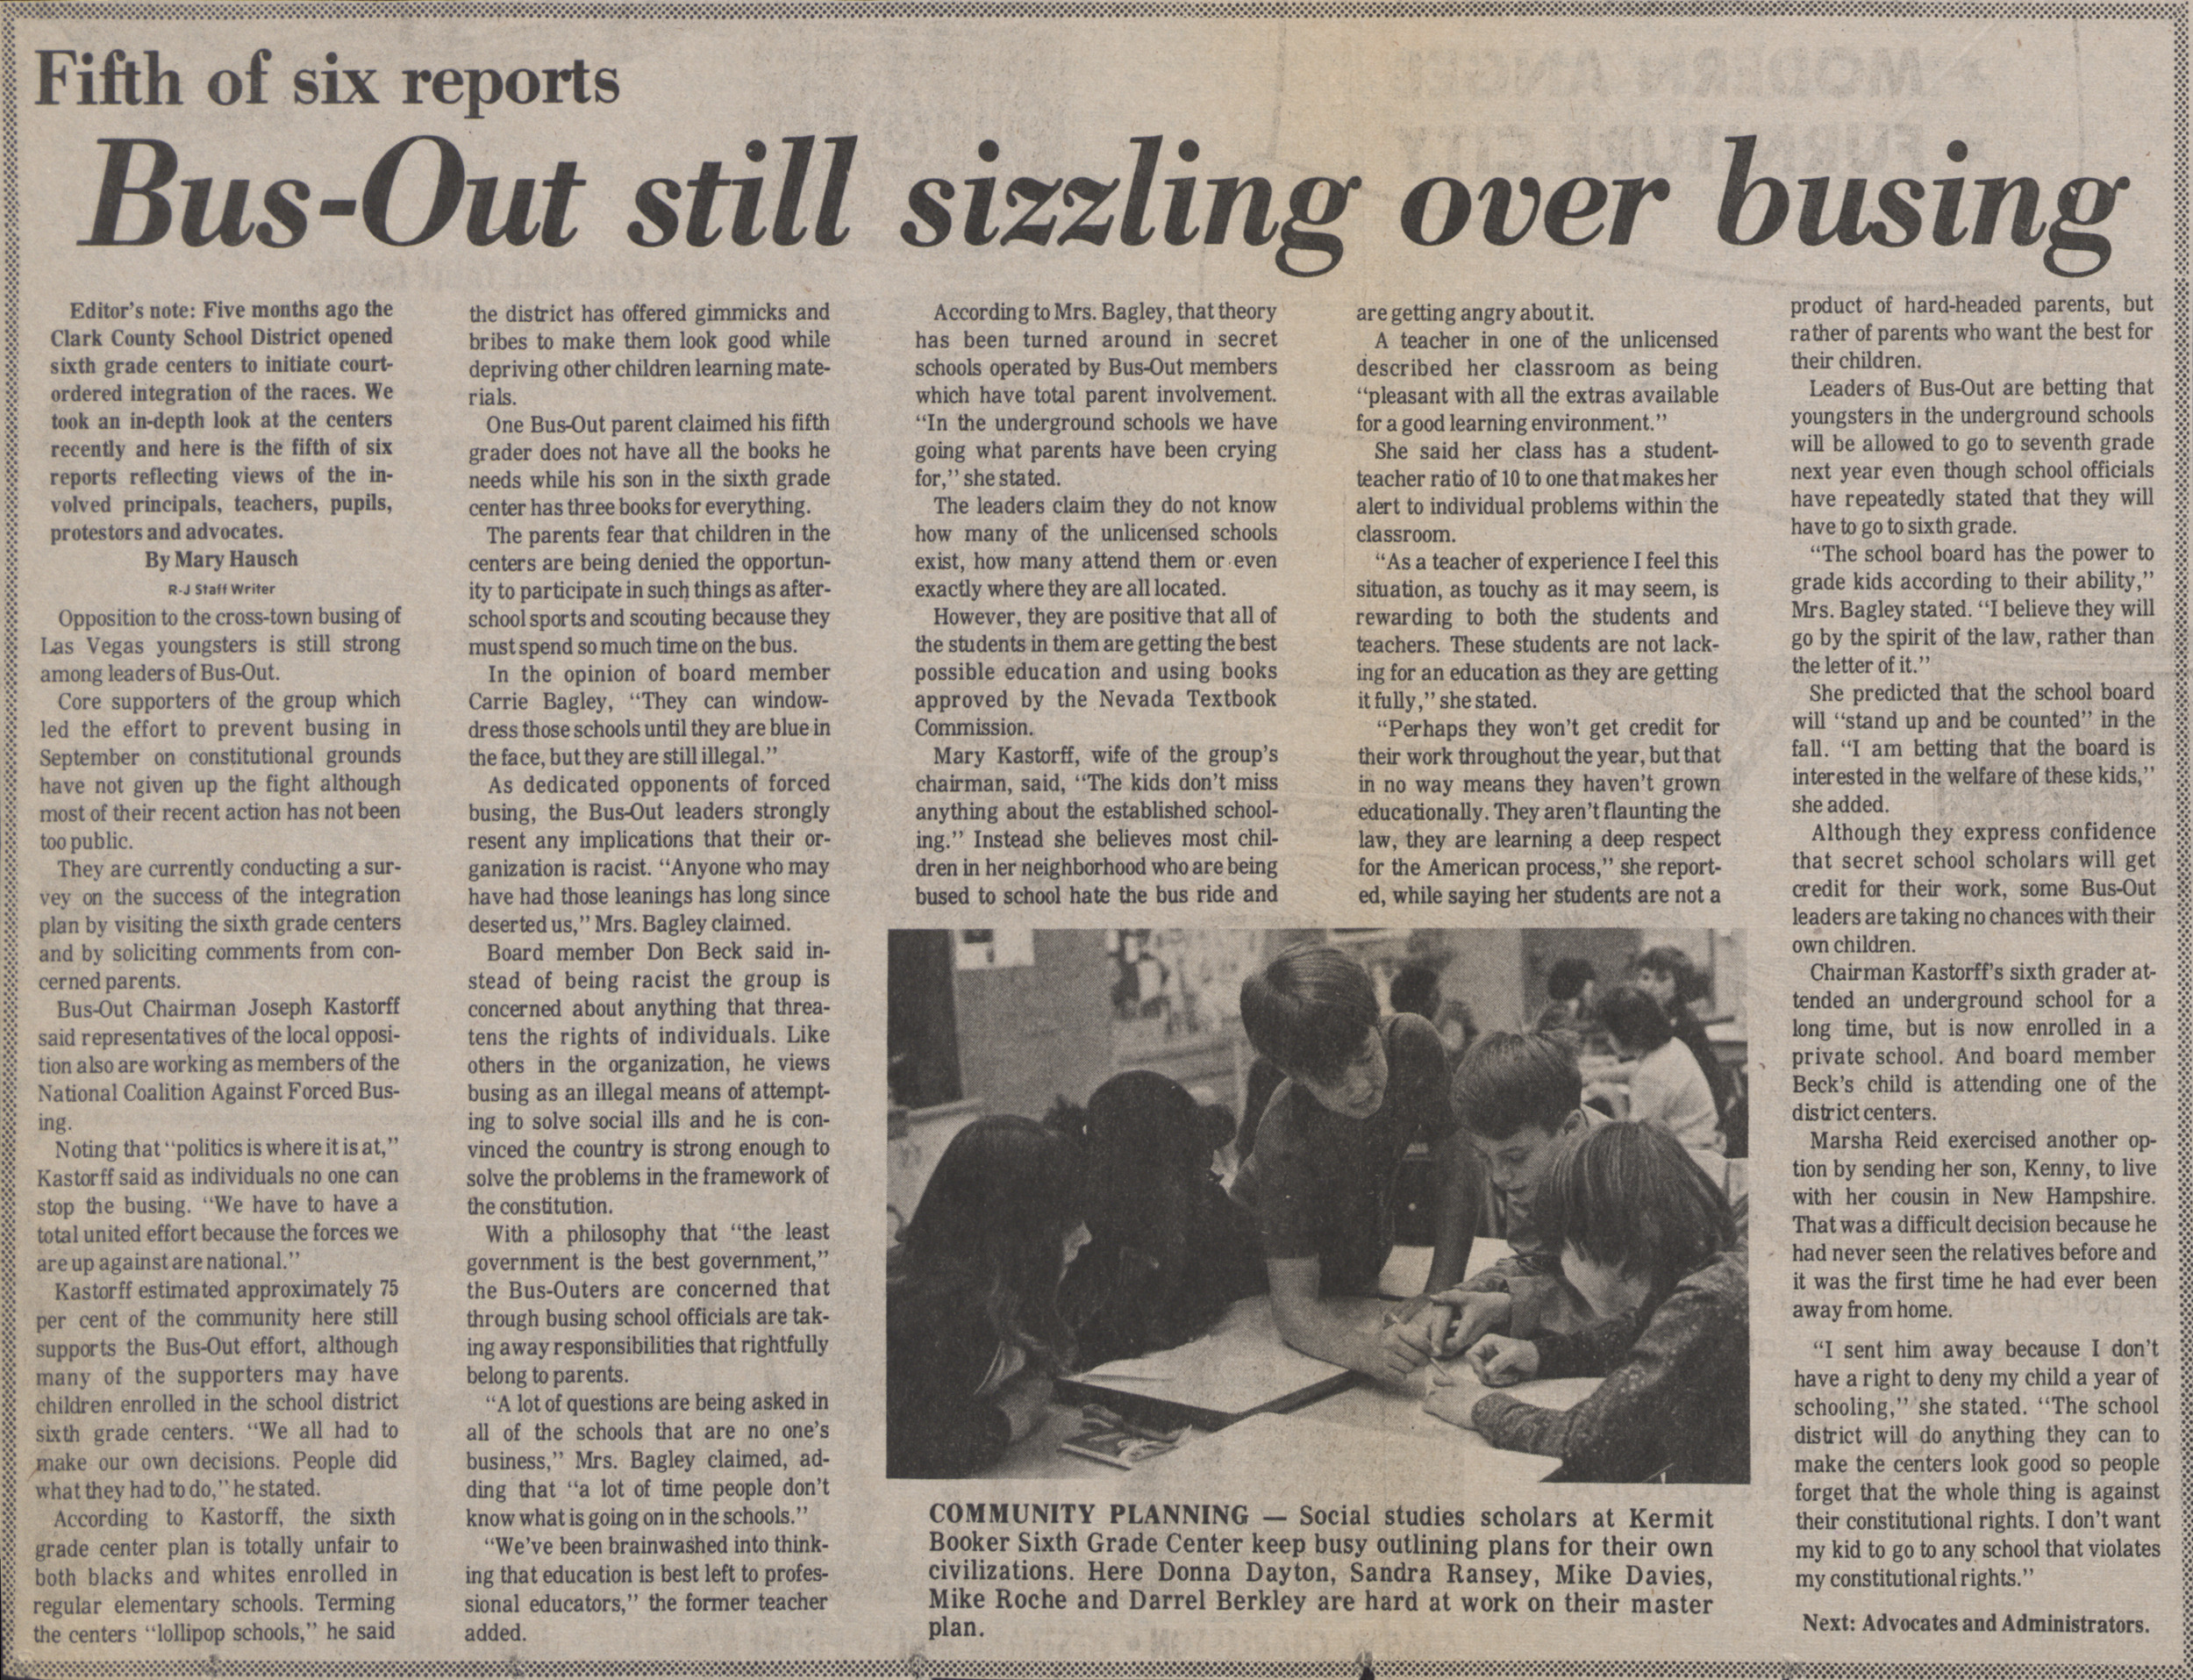 Newspaper clipping, Fifth of six reports, Bus-Out still sizzling over busing, Las Vegas Review-Journal, February 22, 1973